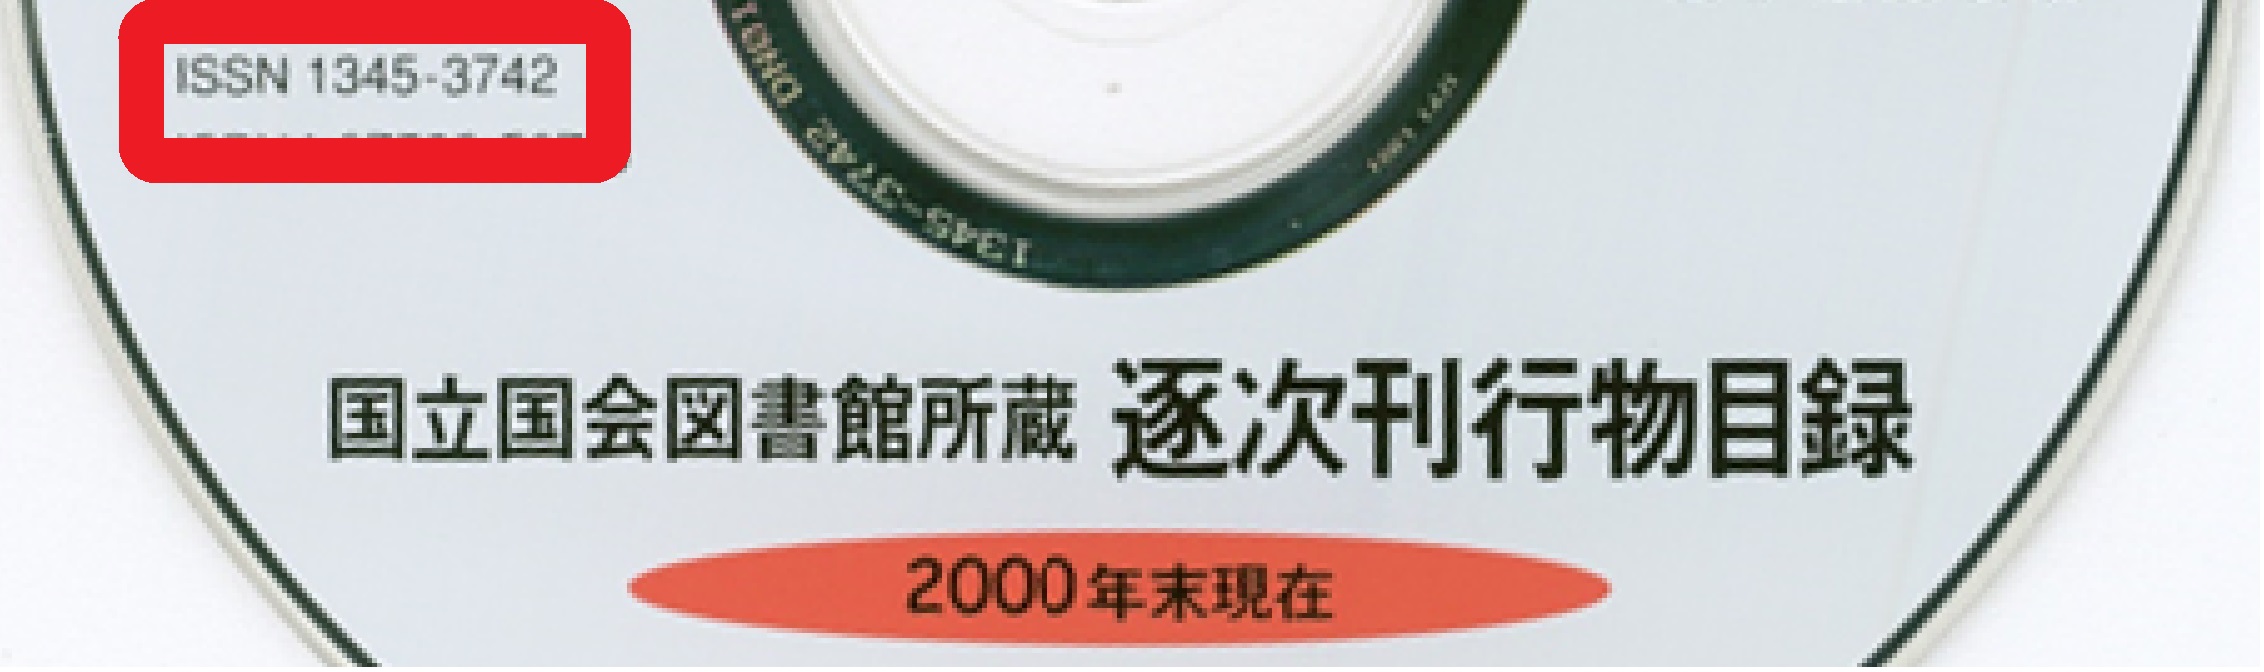 Figures to show the examples of display of ISSN. In the case of CD-ROMs, DVD-ROMs, and other packaged electronic publications, the ISSN should be displayed on the disc label, the disc case, the title screen, or other prominent position.